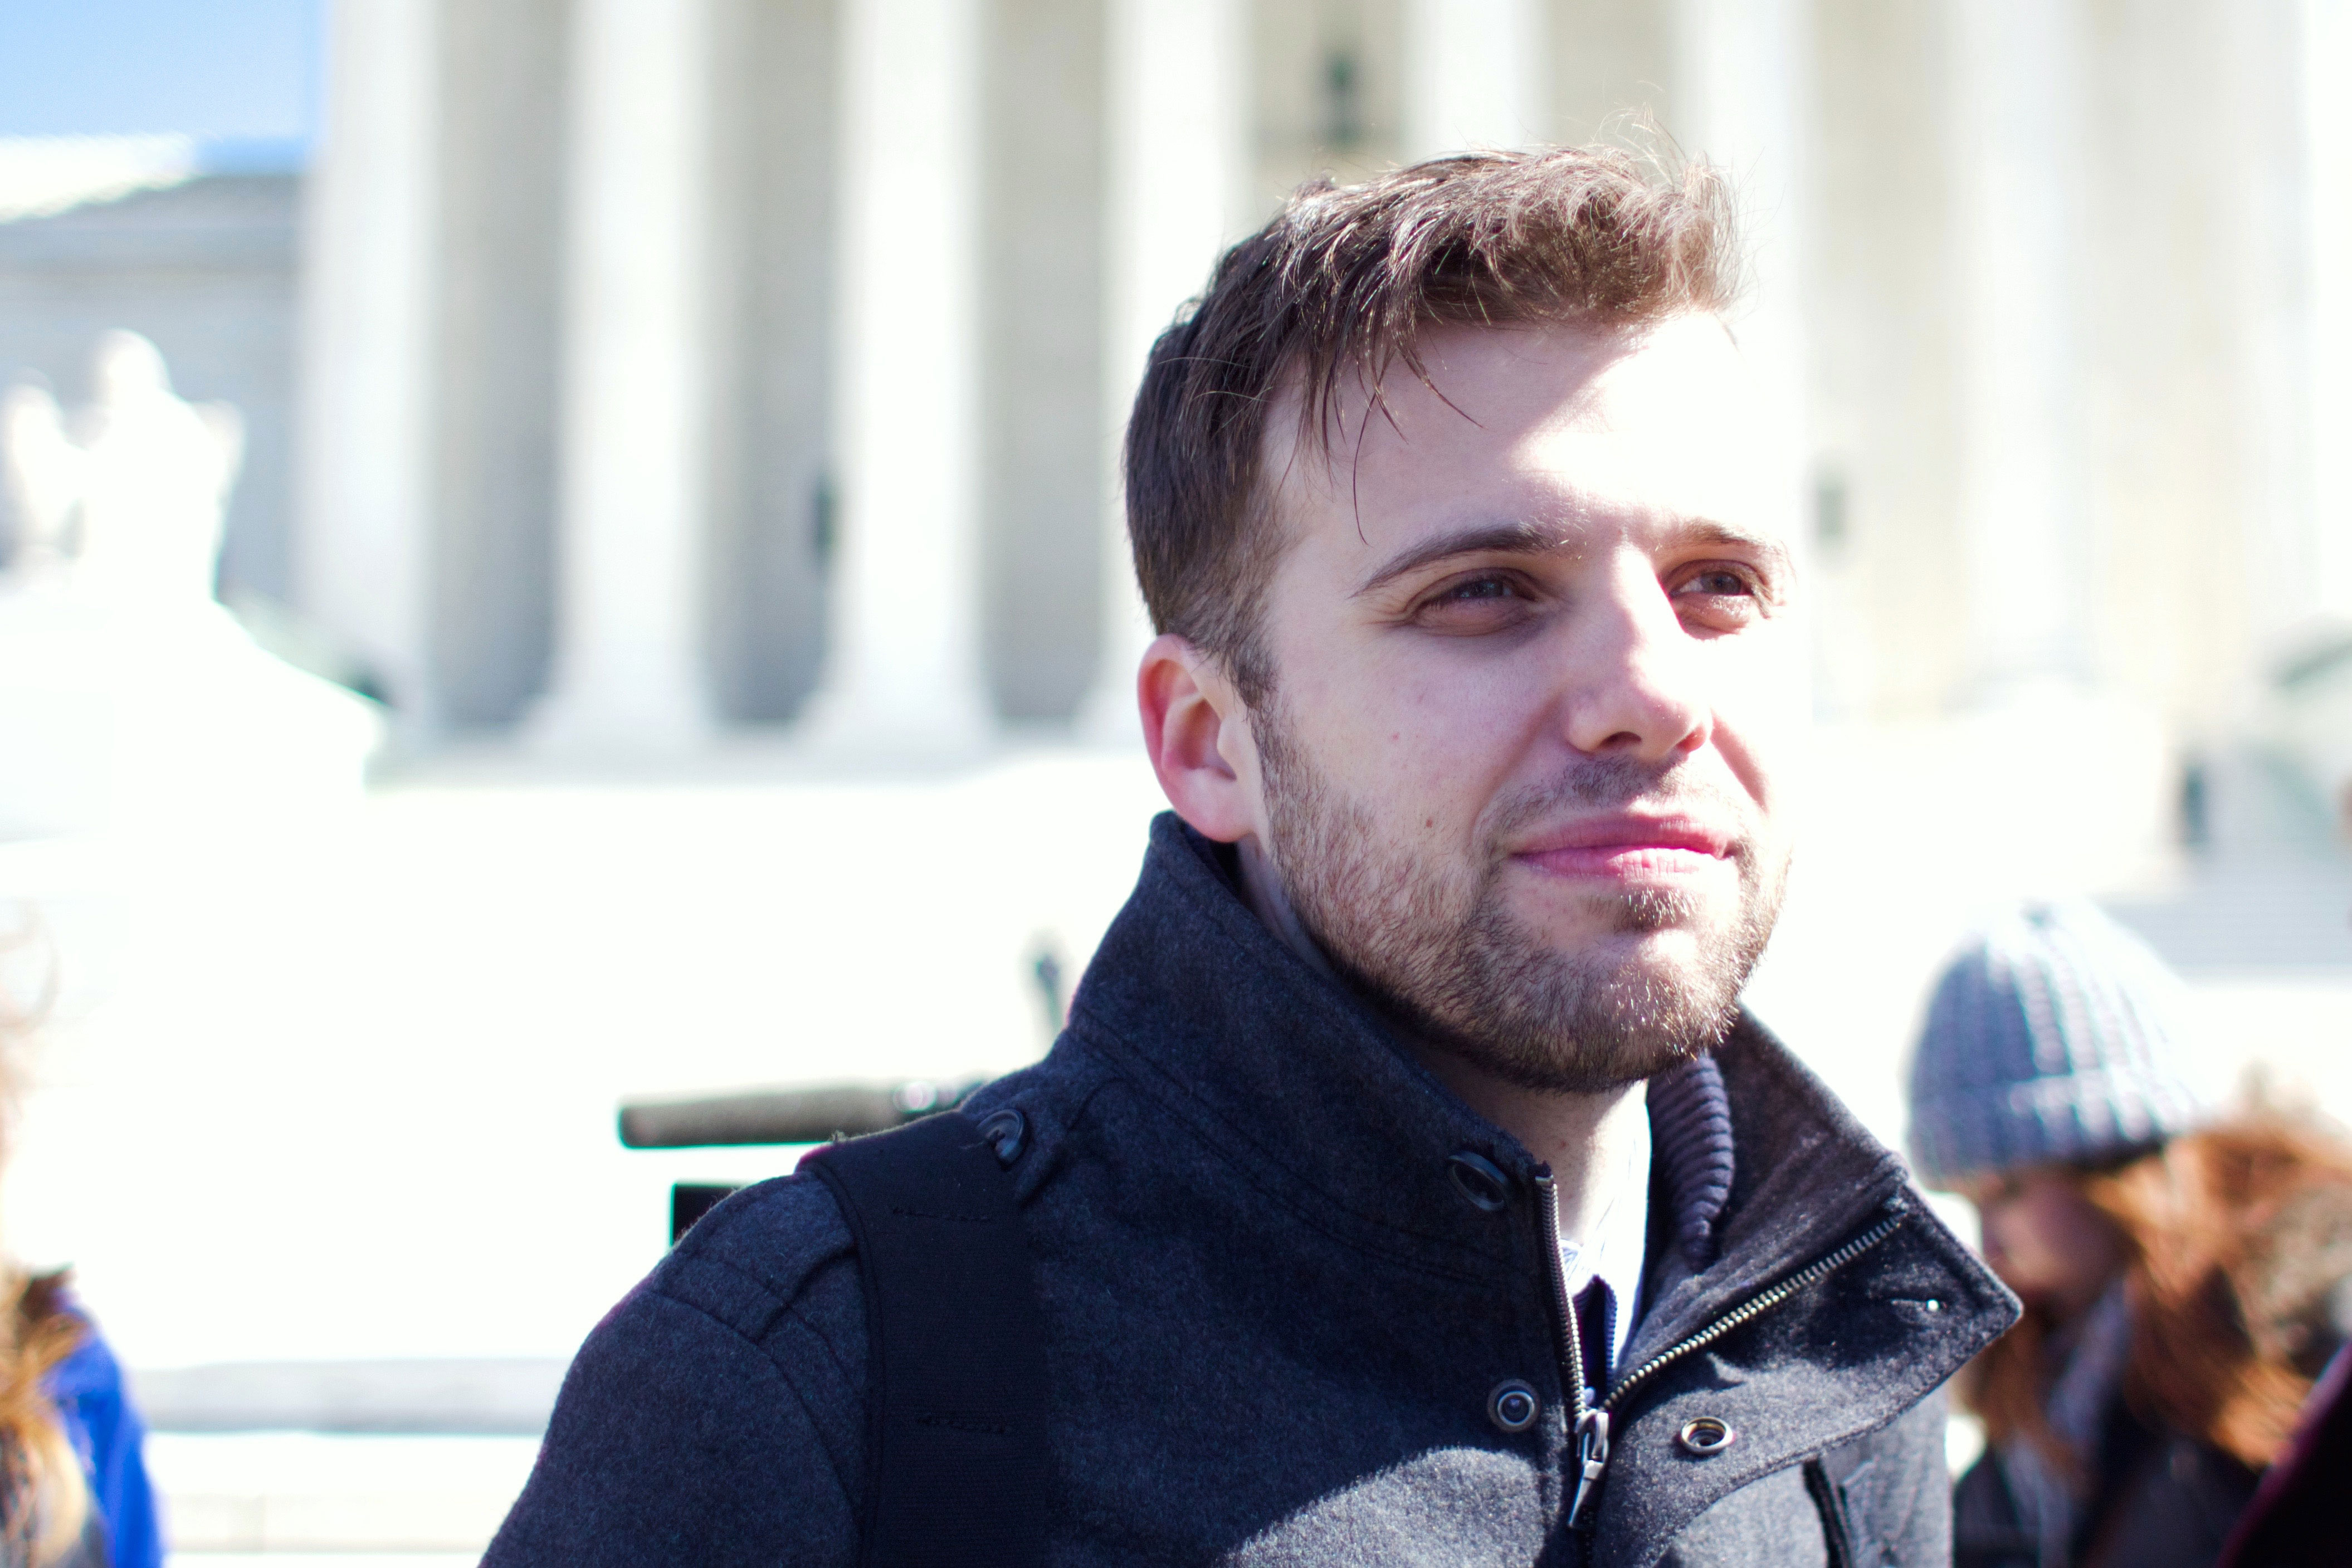 David Altrogge, director of "3801 Lancaster: American Tragedy," at the Supreme Court on March 2. (Photo: Courtesy of Josh Shepherd/Bound4LIFE)